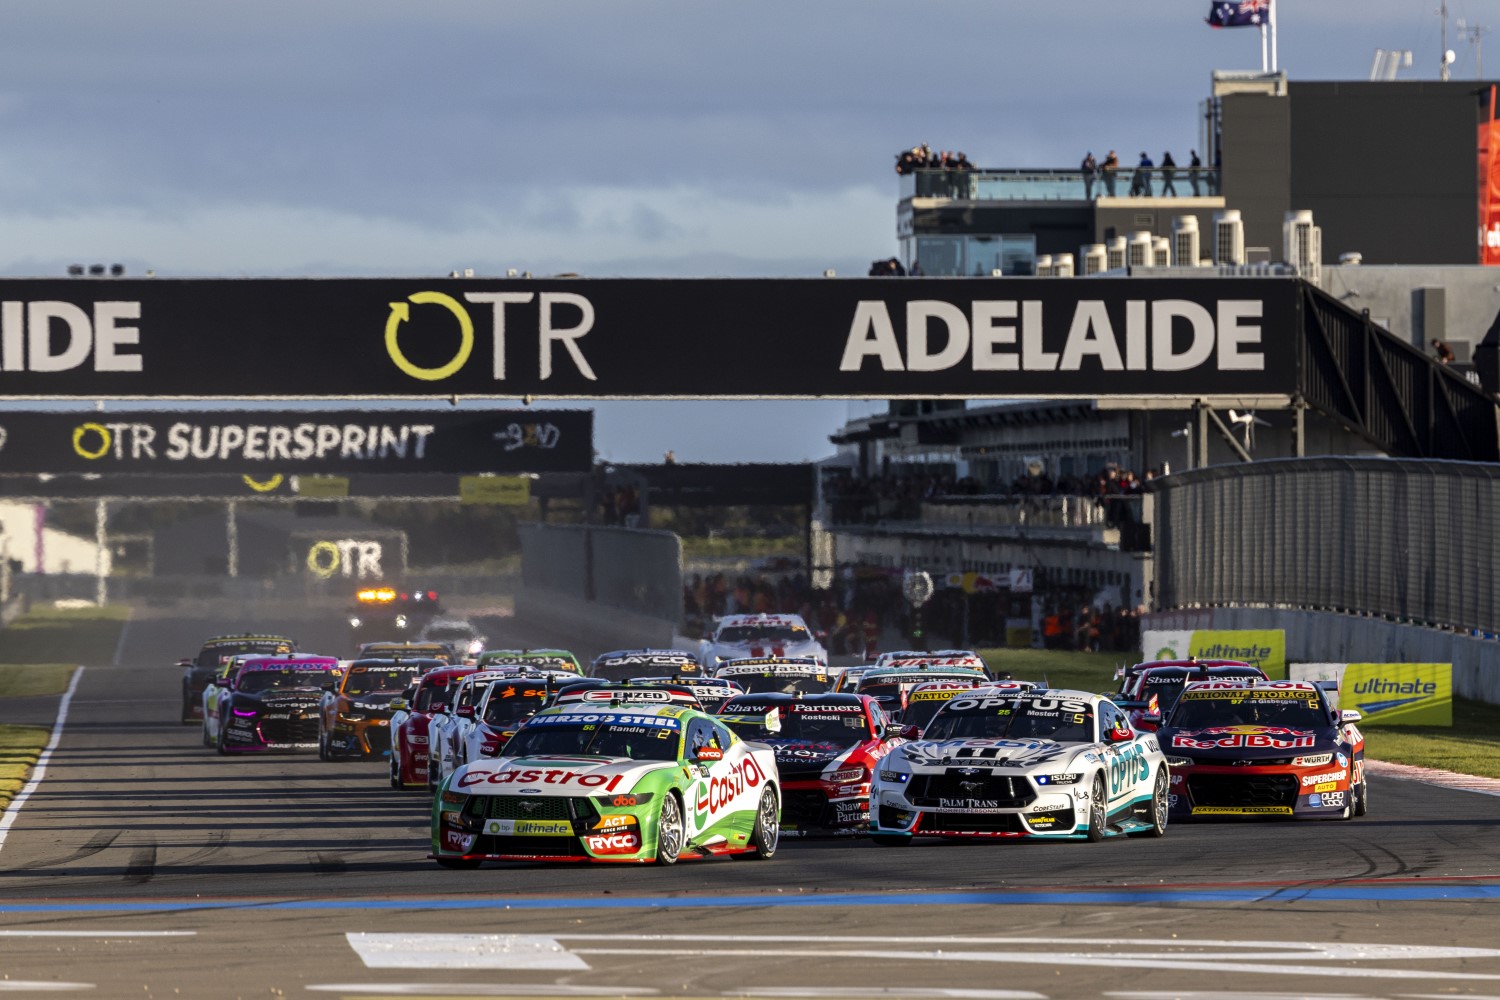 Race 1 start 2023 OTR SuperSprint, Event 8 of the Repco Supercars Championship, The Bend, Tailem Bend, South Australia, Australia. 19 Aug, 2023.